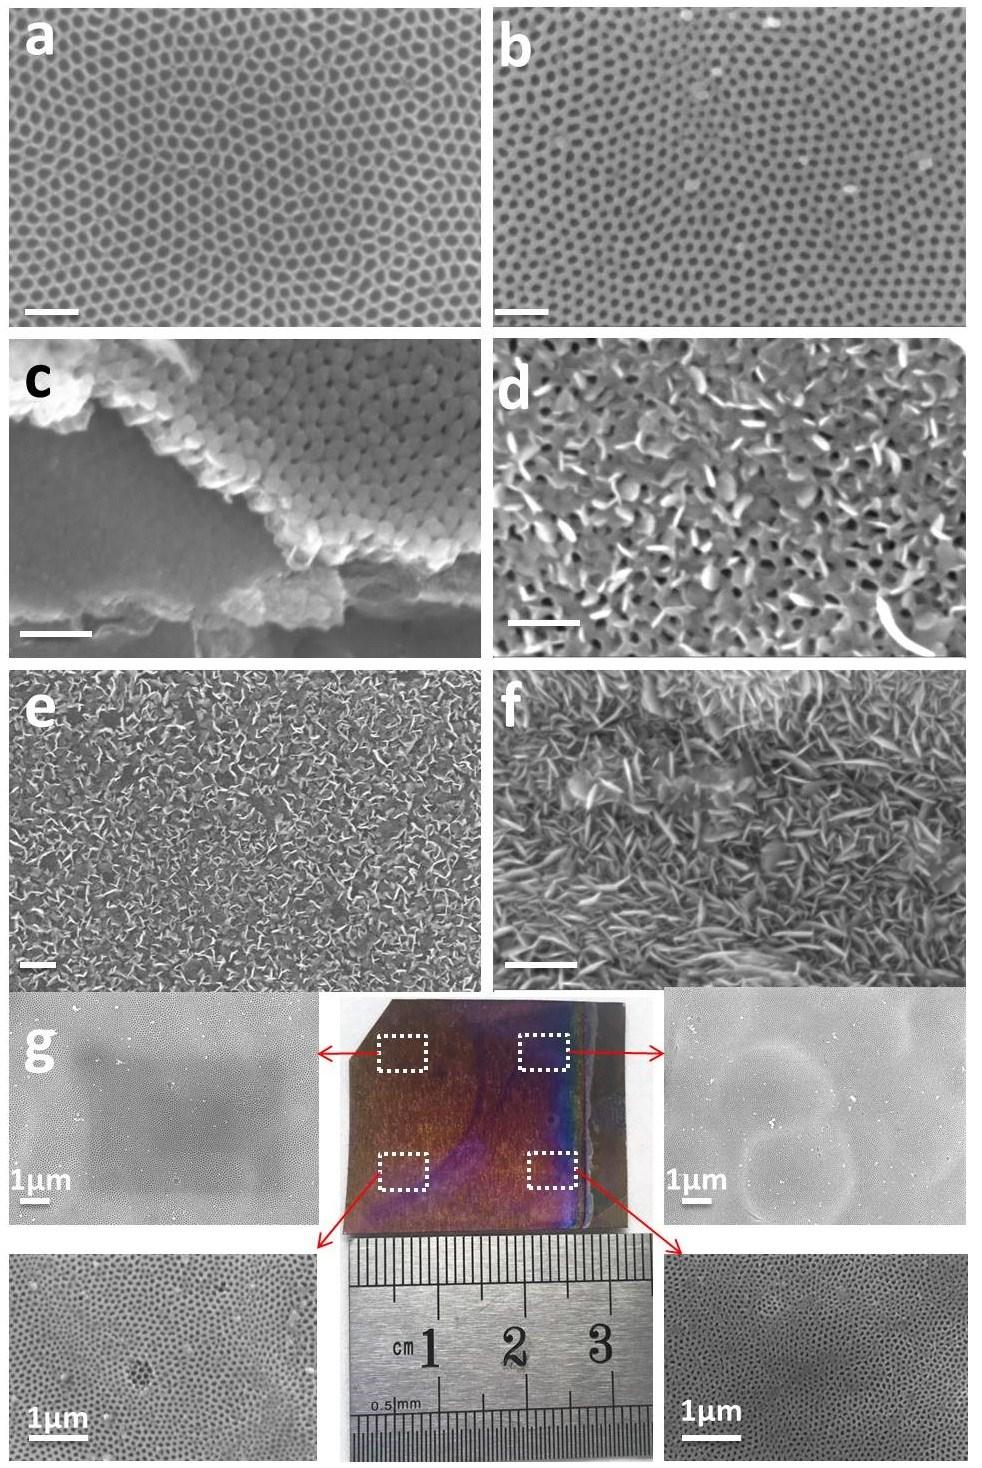 Fig. S1 (a) SEM image of as-anodized TiO 2 nanocavity arrays; (b) after e-beam deposition of 30 nm Mo; (c) cross-sectional view of MoS 2(30) @TiO 2 ; (d) 10 nm Mo sulfurized for 360 min on TiO 2